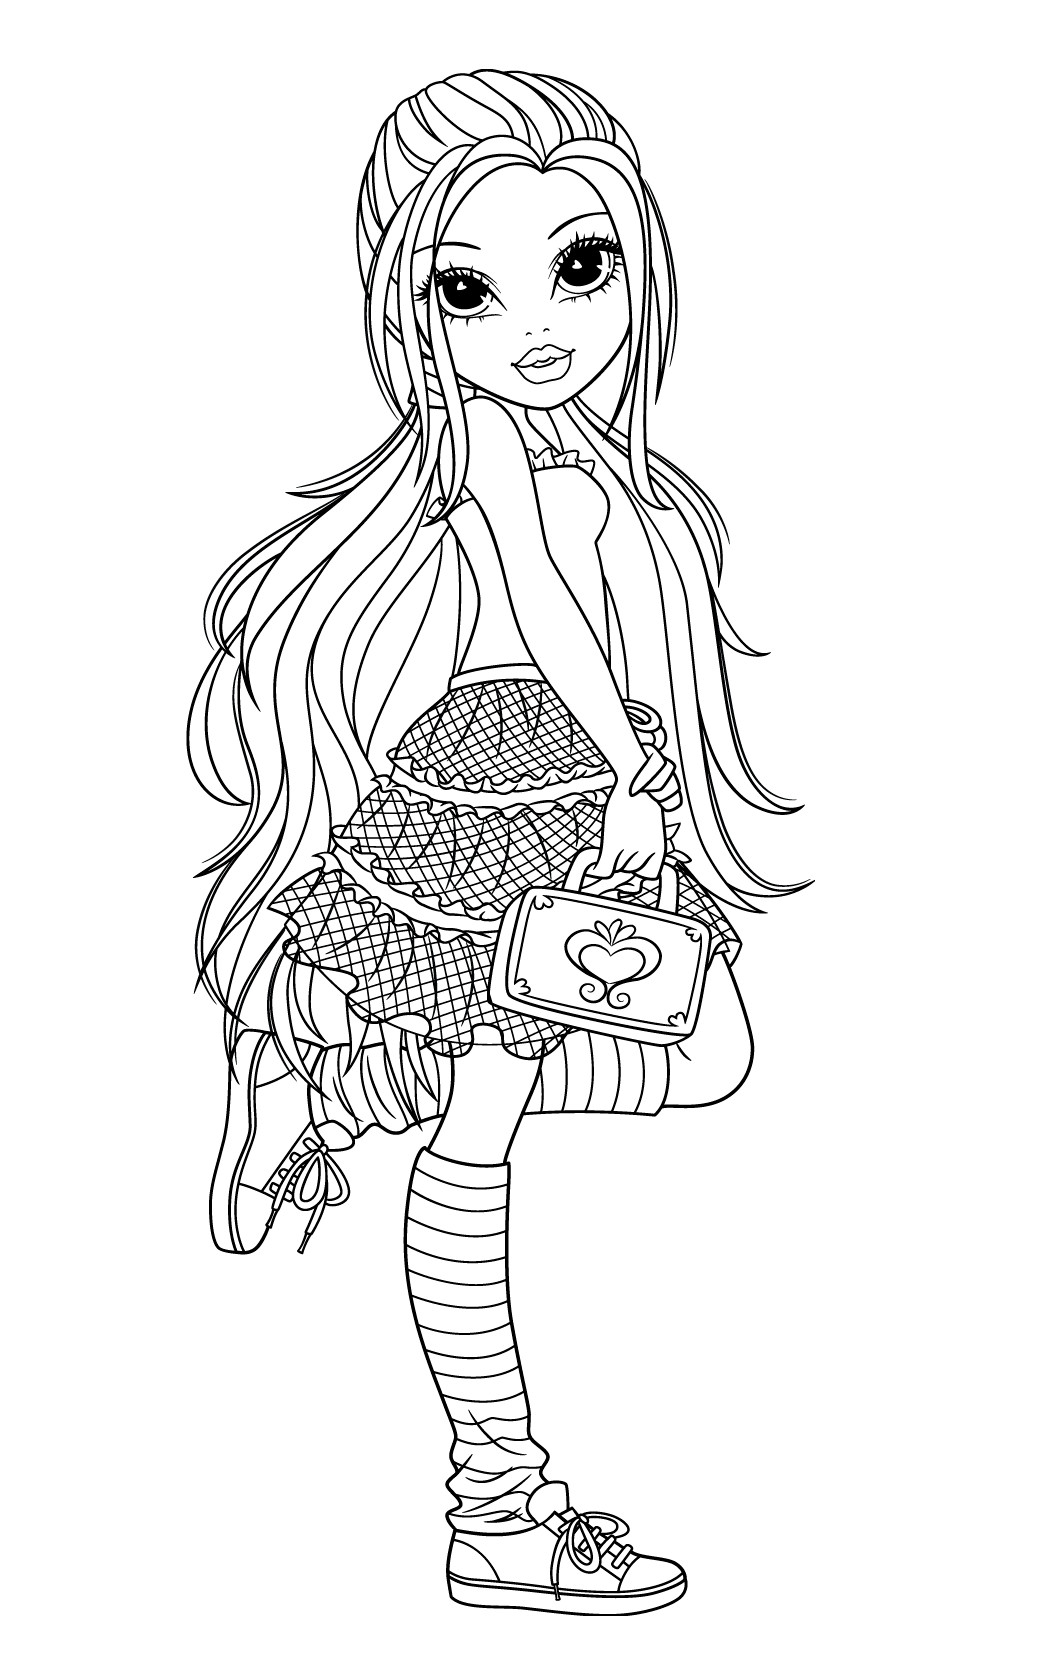 Coloring Book Pages For Girls
 New Moxie Girlz Coloring Pages will be added frequently so